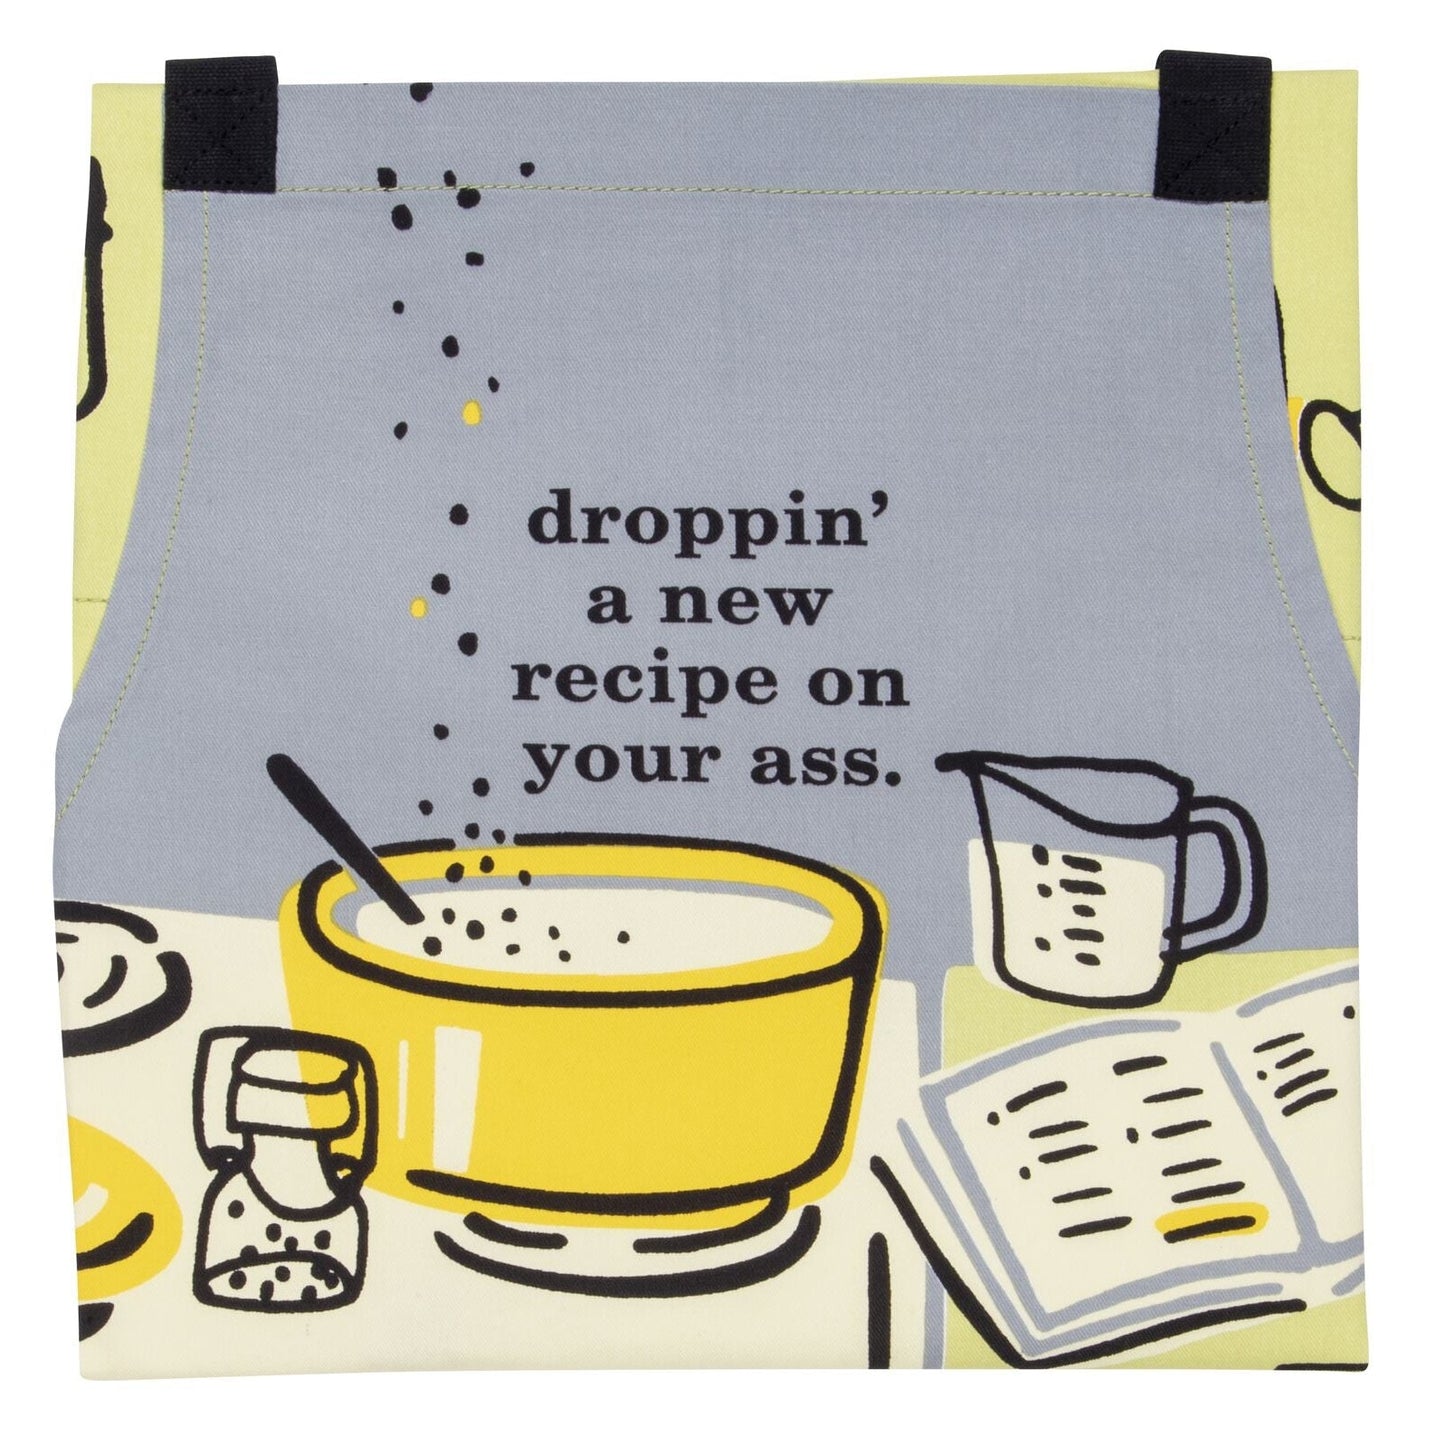 Last Call! Droppin' A New Recipe On Your Ass Funny Cooking and BBQ Apron Unisex 2 Pockets Adjustable Strap 100% Cotton